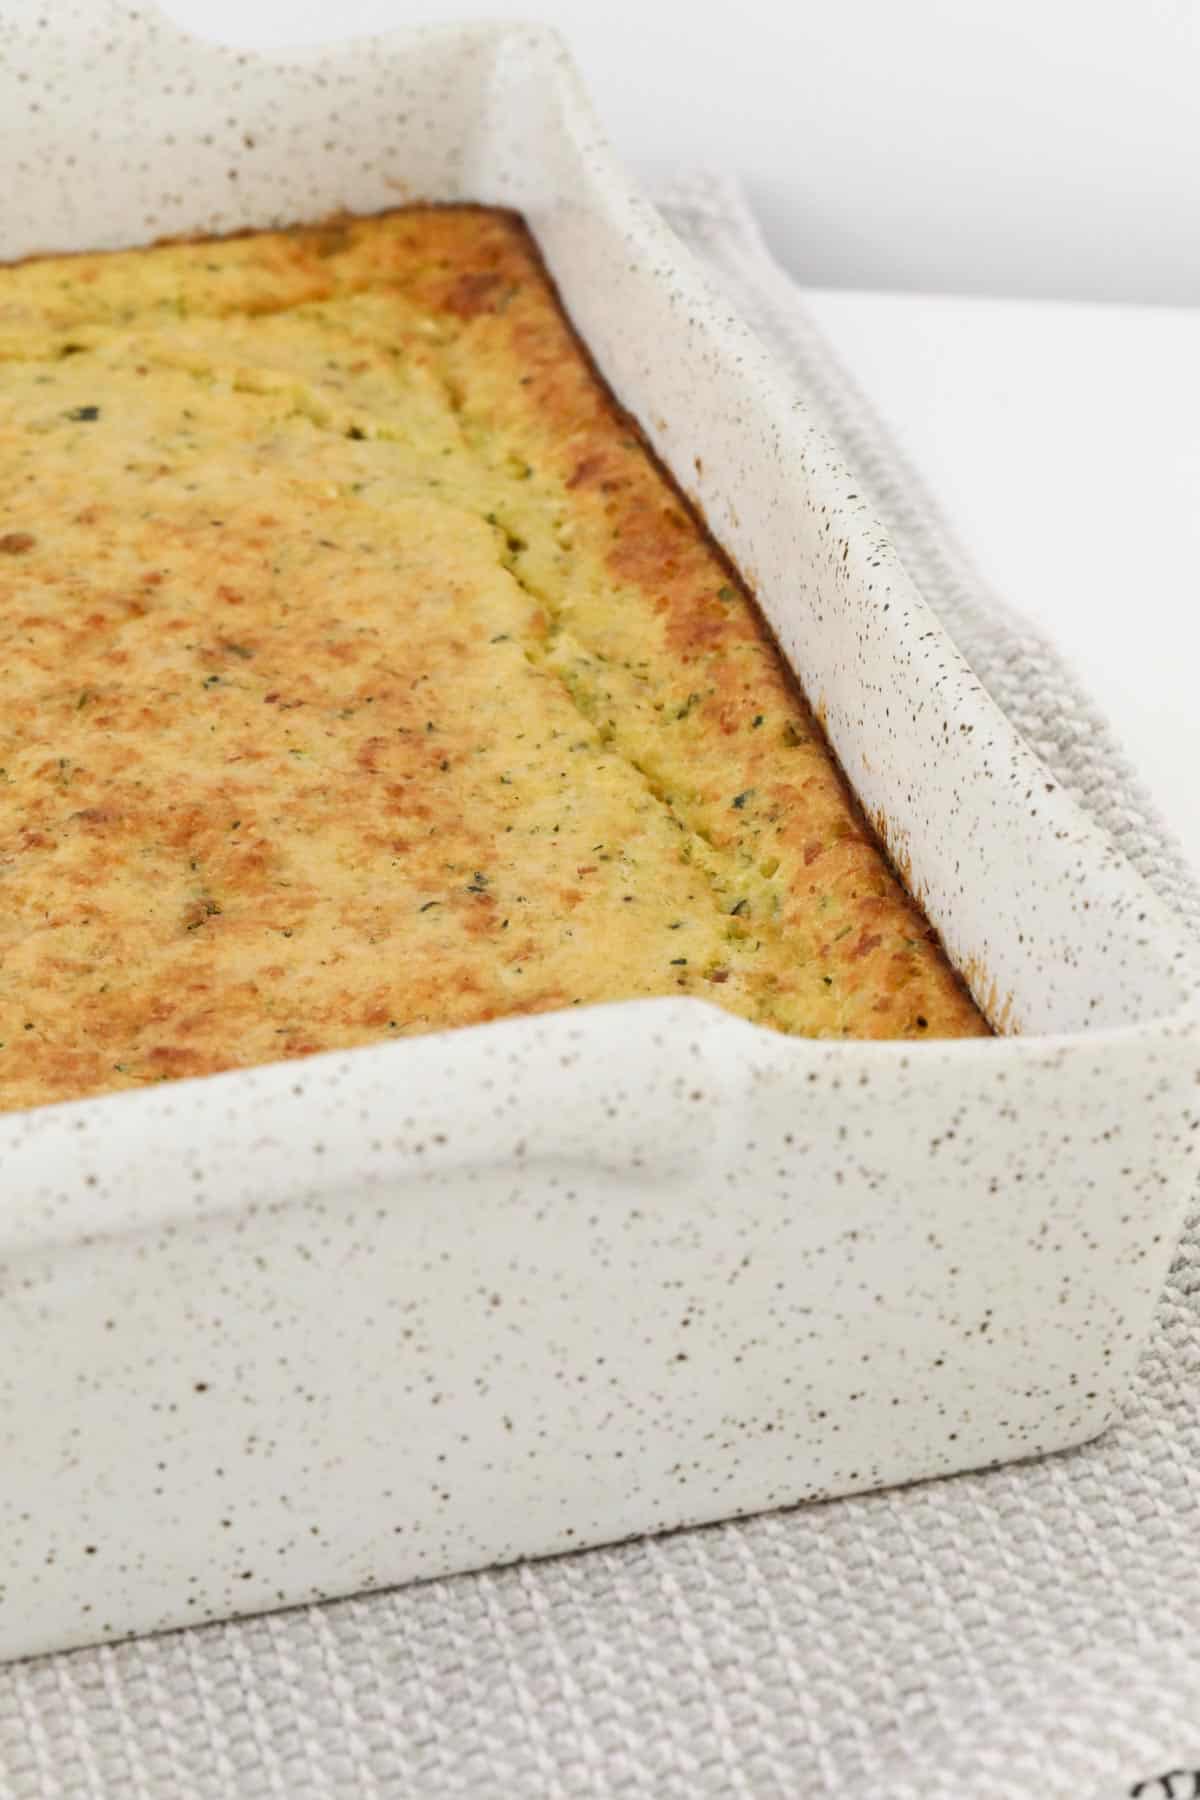 A golden baked savoury slice in a baking tin.